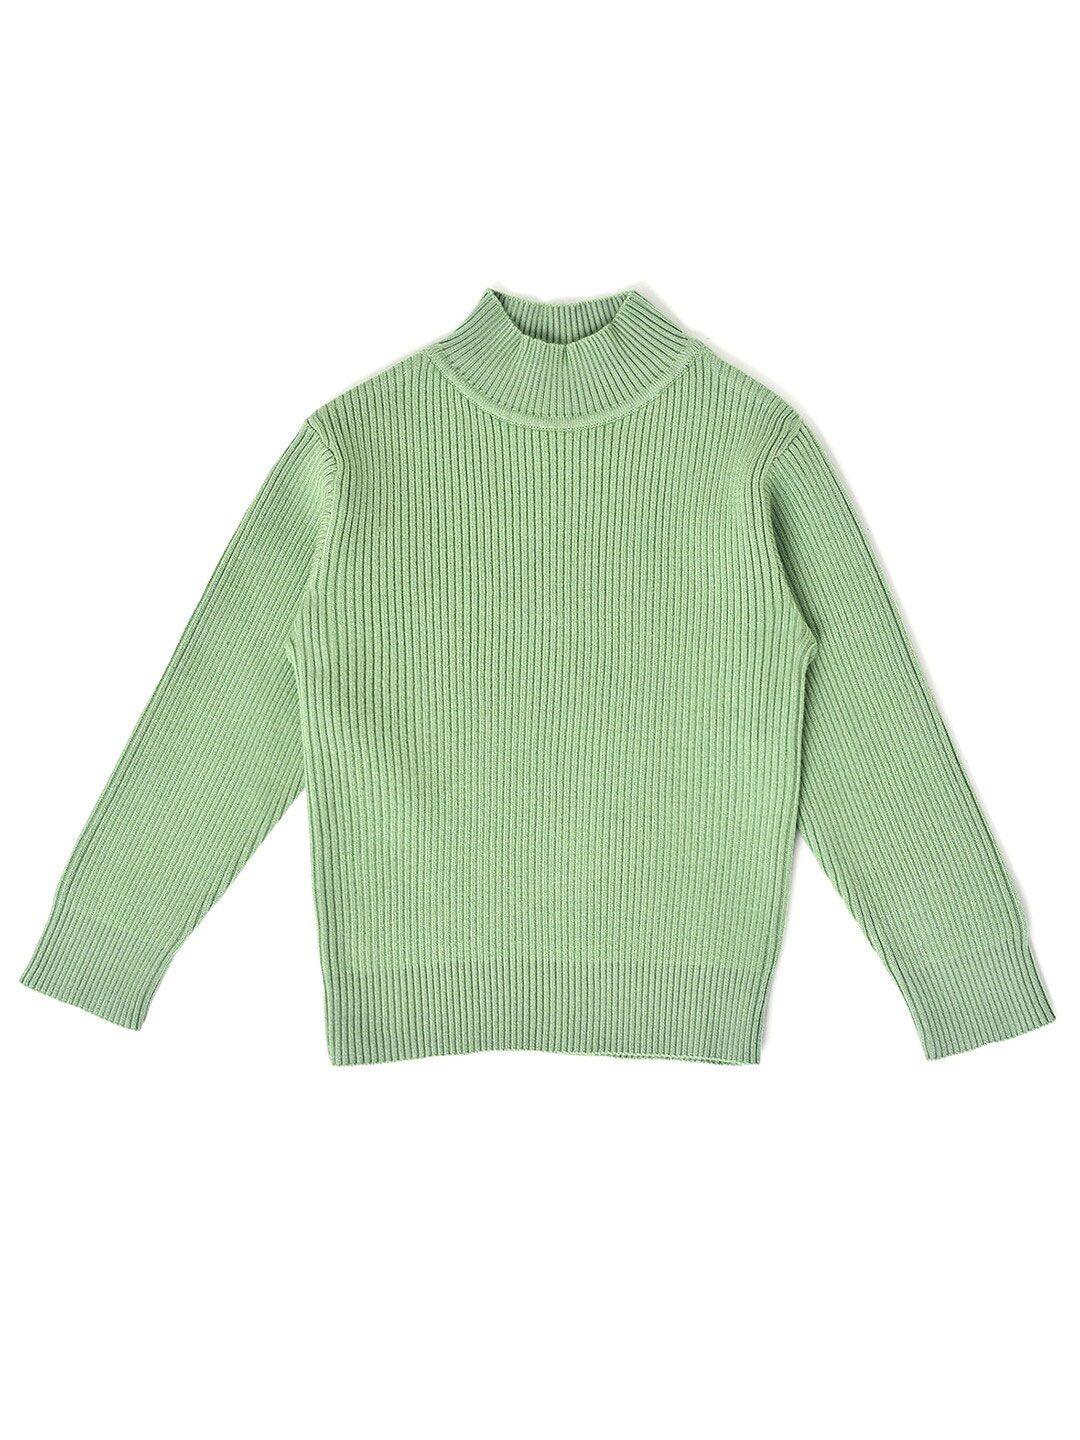 miarcus kids turtle neck ribbed pullover